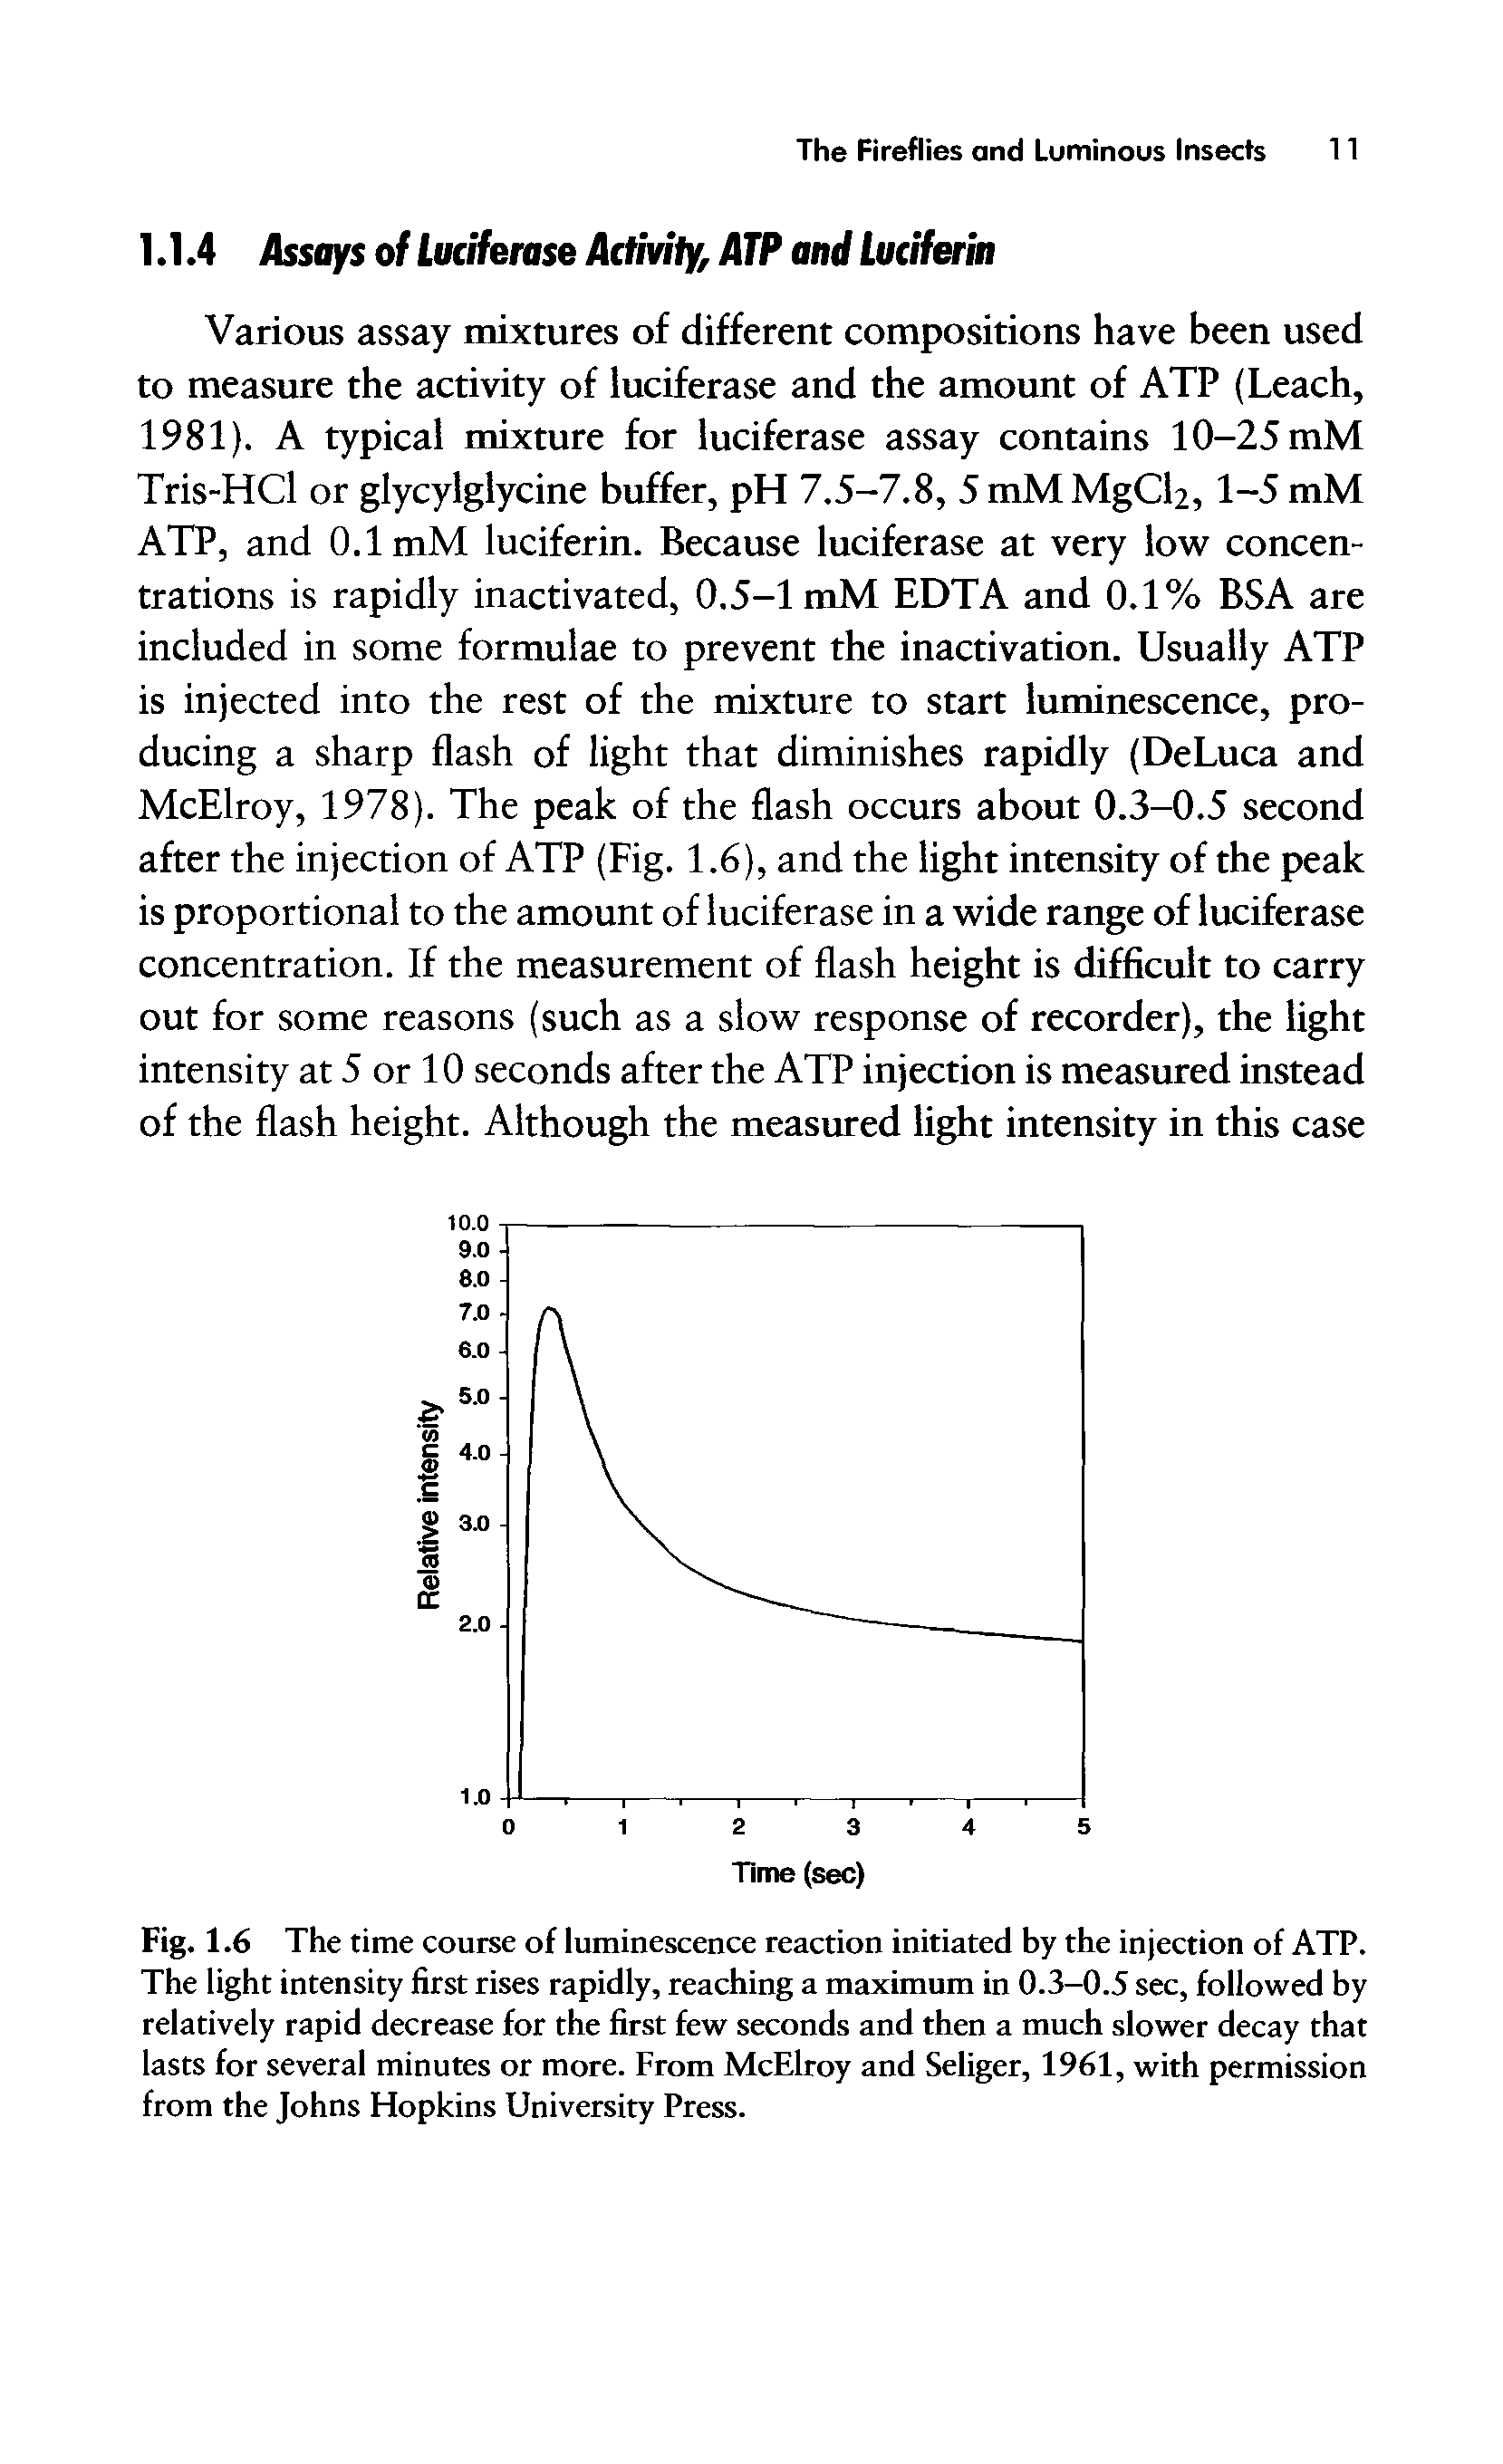 Fig. 1.6 The time course of luminescence reaction initiated by the injection of ATP. The light intensity first rises rapidly, reaching a maximum in 0.3-0.5 sec, followed by relatively rapid decrease for the first few seconds and then a much slower decay that lasts for several minutes or more. From McElroy and Seliger, 1961, with permission from the Johns Hopkins University Press.